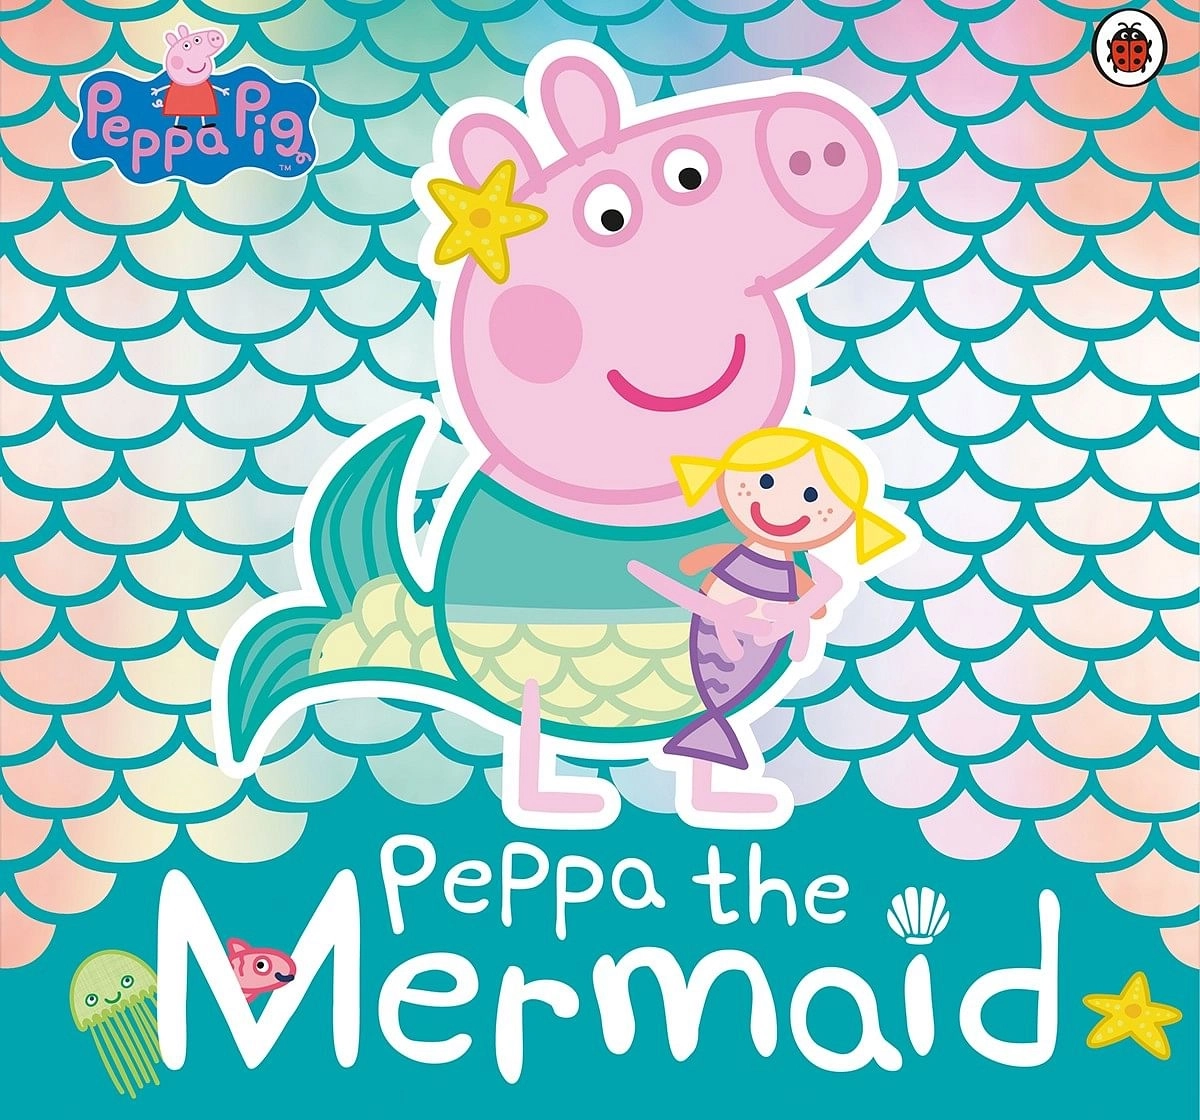 Peppa Pig: Peppa the Mermaid, 32 Pages Book by Ladybird, Paperback